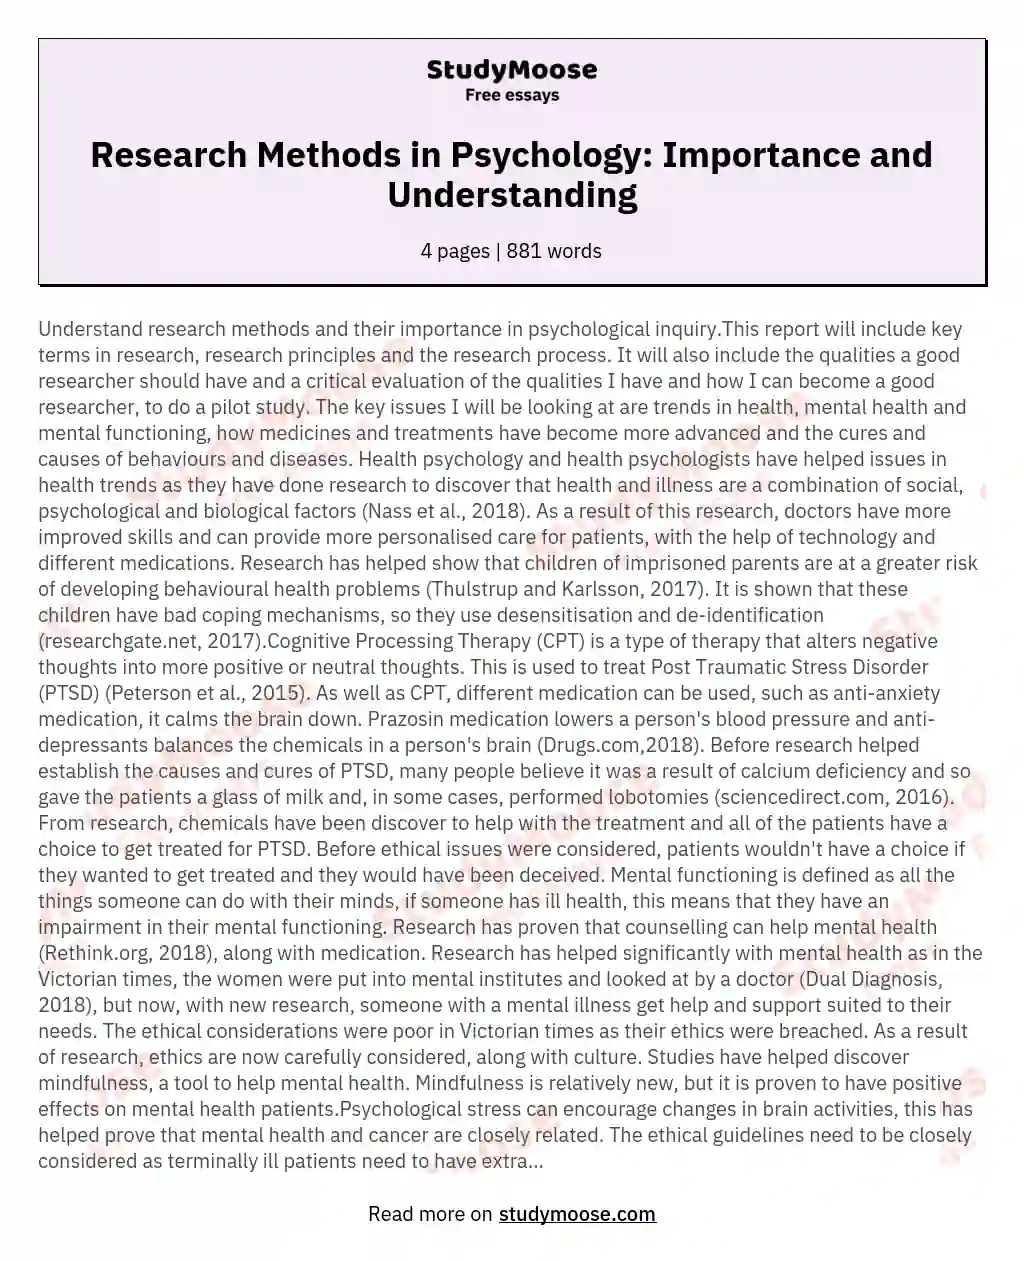 Research Methods in Psychology: Importance and Understanding essay